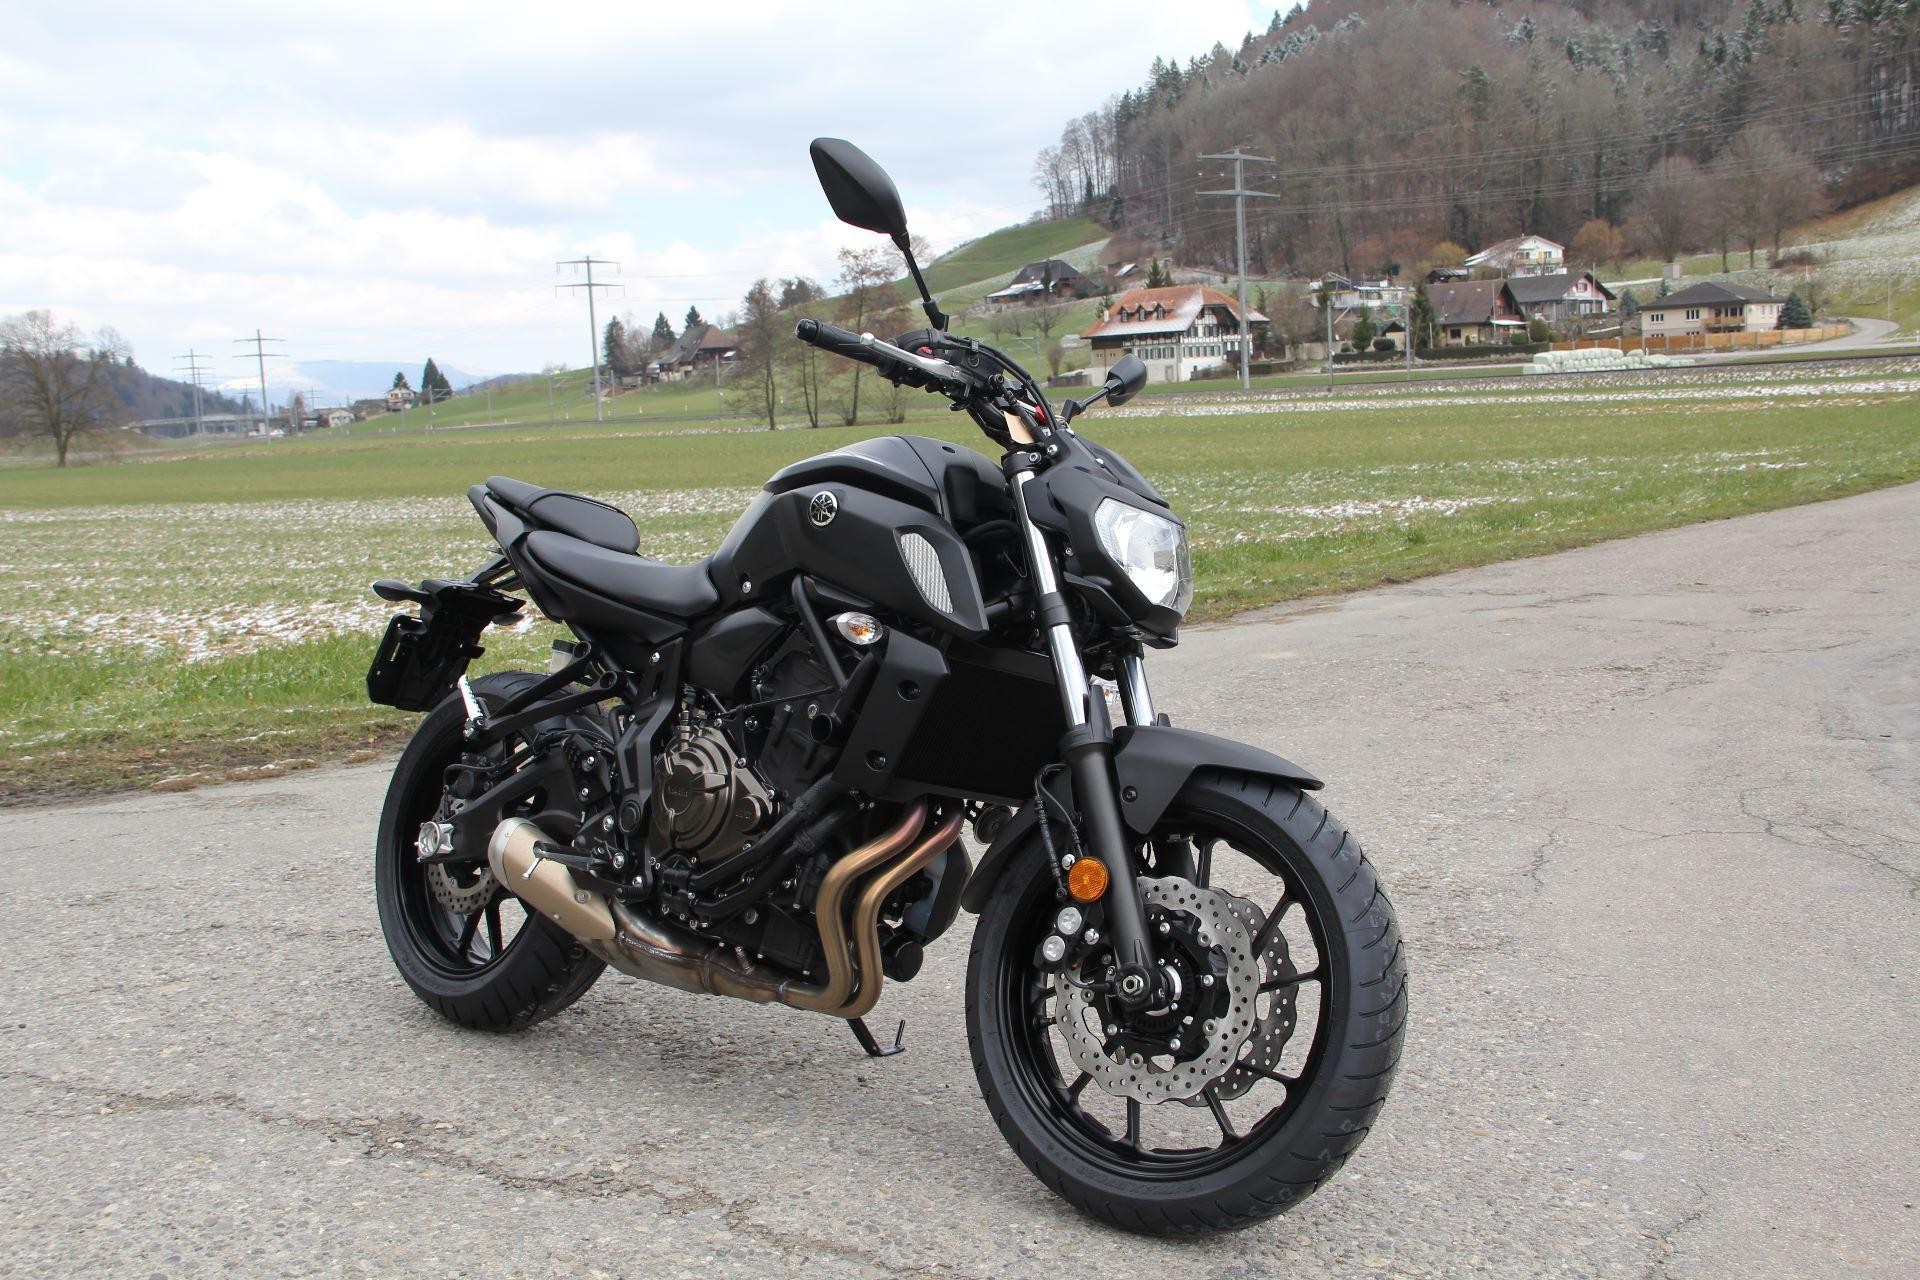 YAMAHA MT-07 for rent near Riverview, FL - Riders Share